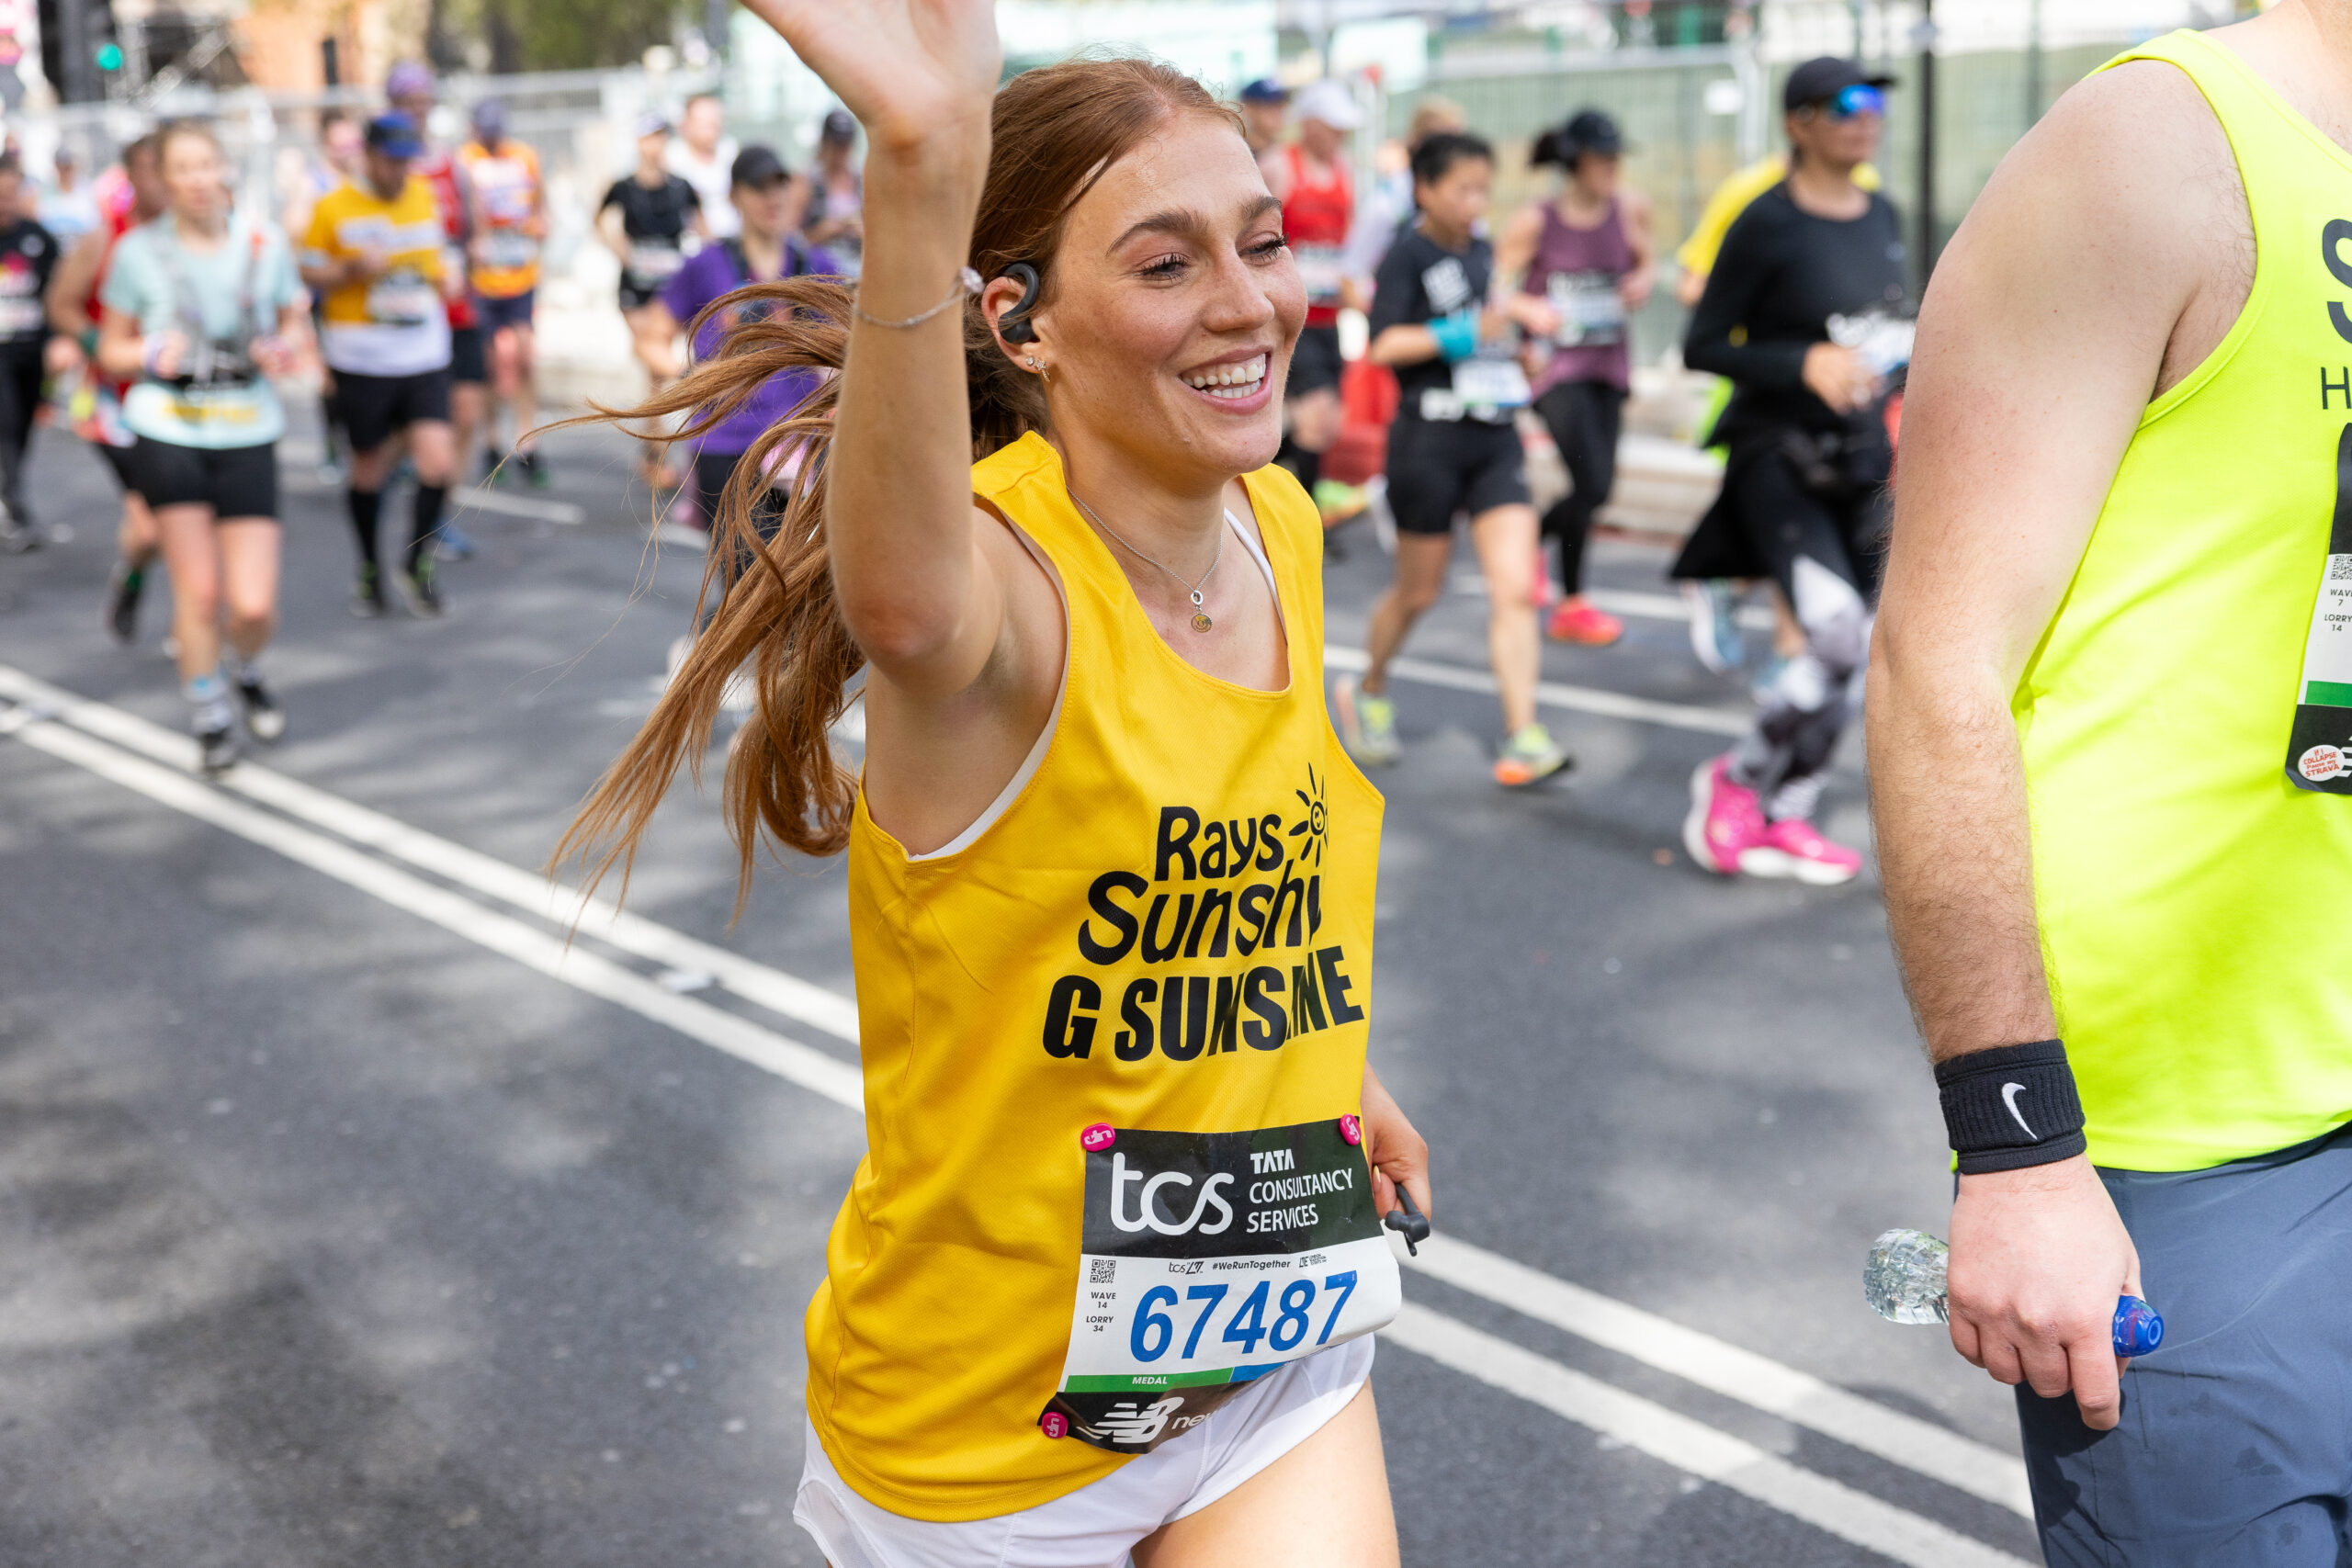 Team Sunshine London Marathon 2024 runners raise nearly £150K to help grant more magical wishes to seriously ill children